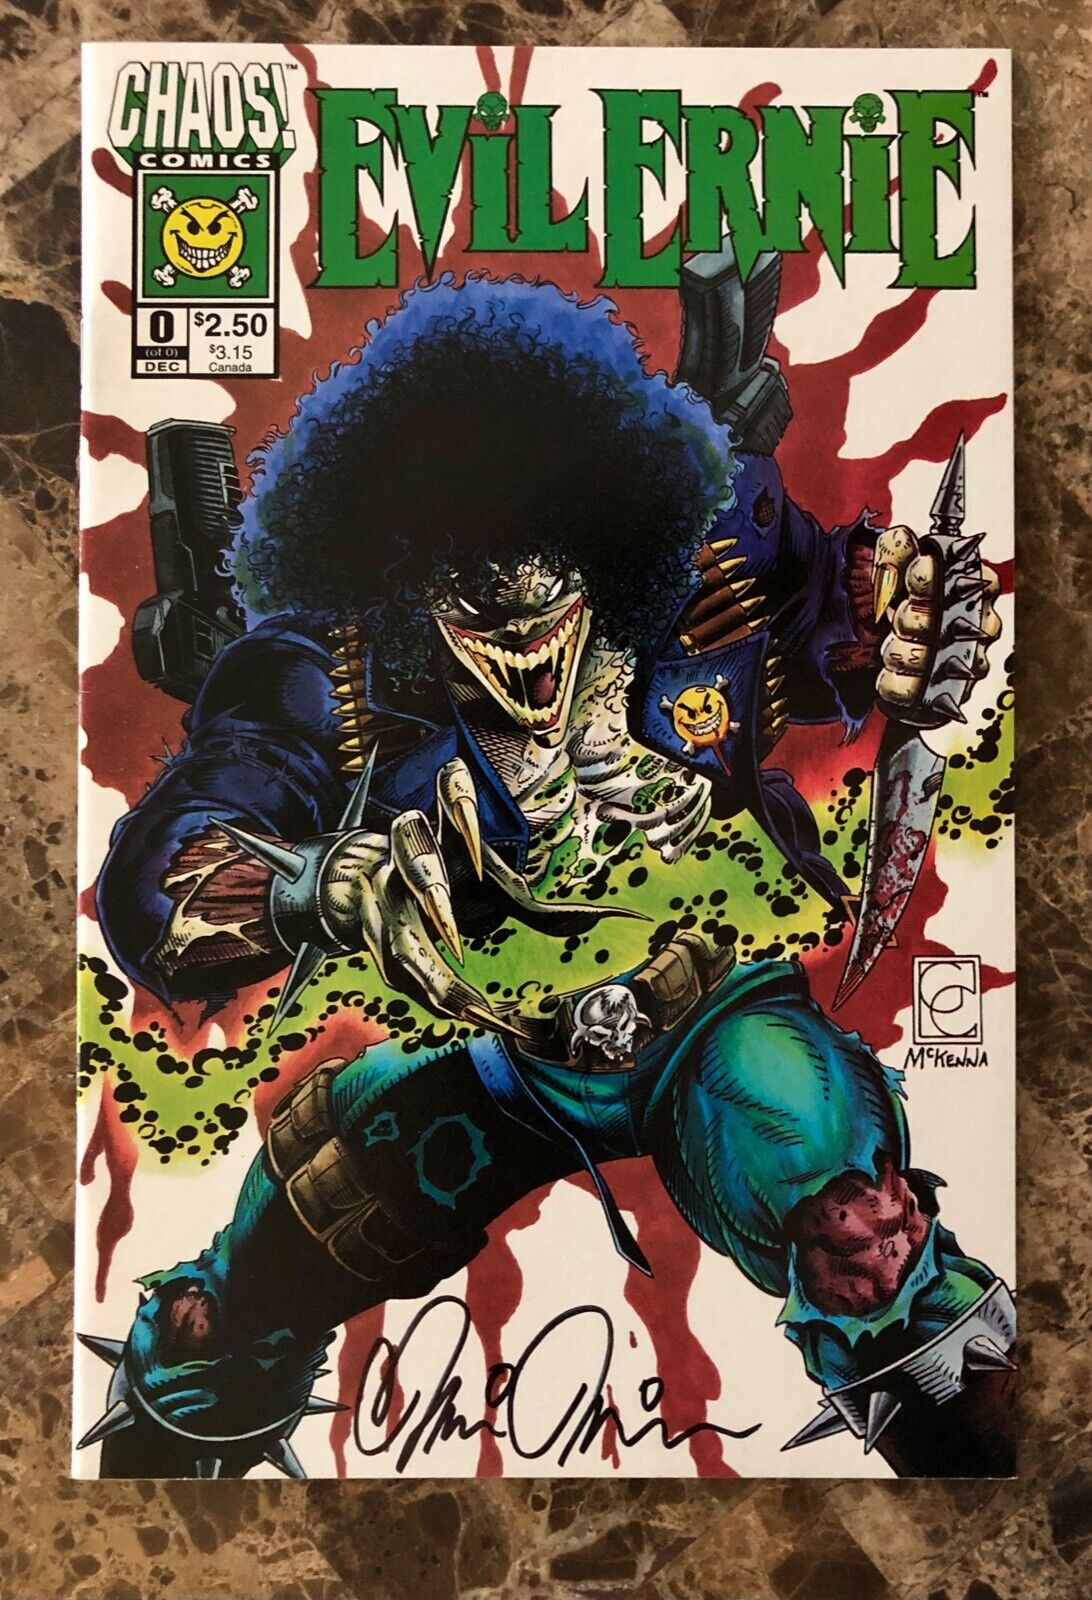 Evil Ernie #0 1993 NM Chaos Signed By Brian Pulido